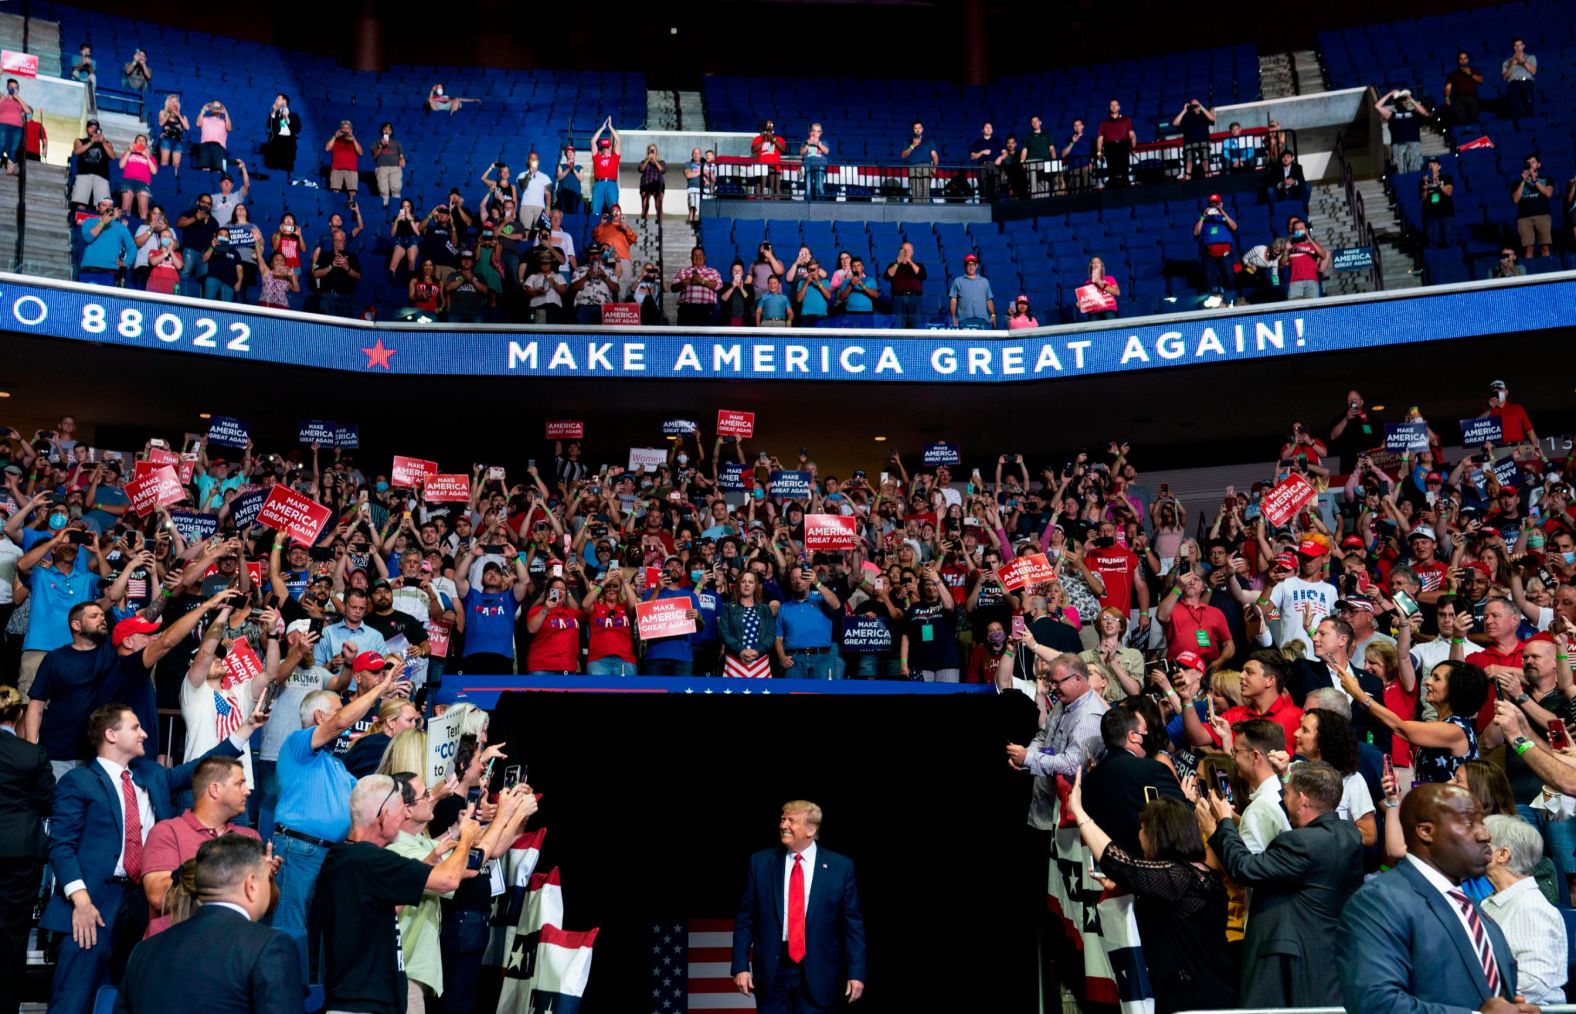 Trump arrives for a <a href="index.php?page=&url=https%3A%2F%2Fwww.cnn.com%2F2020%2F06%2F20%2Fpolitics%2Ftulsa-rally-trump%2Findex.html" target="_blank">rally in Tulsa, Oklahoma,</a> on June 20. It was his <a href="index.php?page=&url=https%3A%2F%2Fwww.cnn.com%2F2020%2F06%2F20%2Fpolitics%2Fgallery%2Ftrump-rally-tulsa%2Findex.html" target="_blank">first rally since the Covid-19 pandemic began</a>, with the the indoor venue generating <a href="index.php?page=&url=https%3A%2F%2Fwww.cnn.com%2F2020%2F06%2F20%2Fpolitics%2Fdonald-trump-rally-tulsa-coronavirus%2Findex.html" target="_blank">concerns about the potential spread of coronavirus.</a>